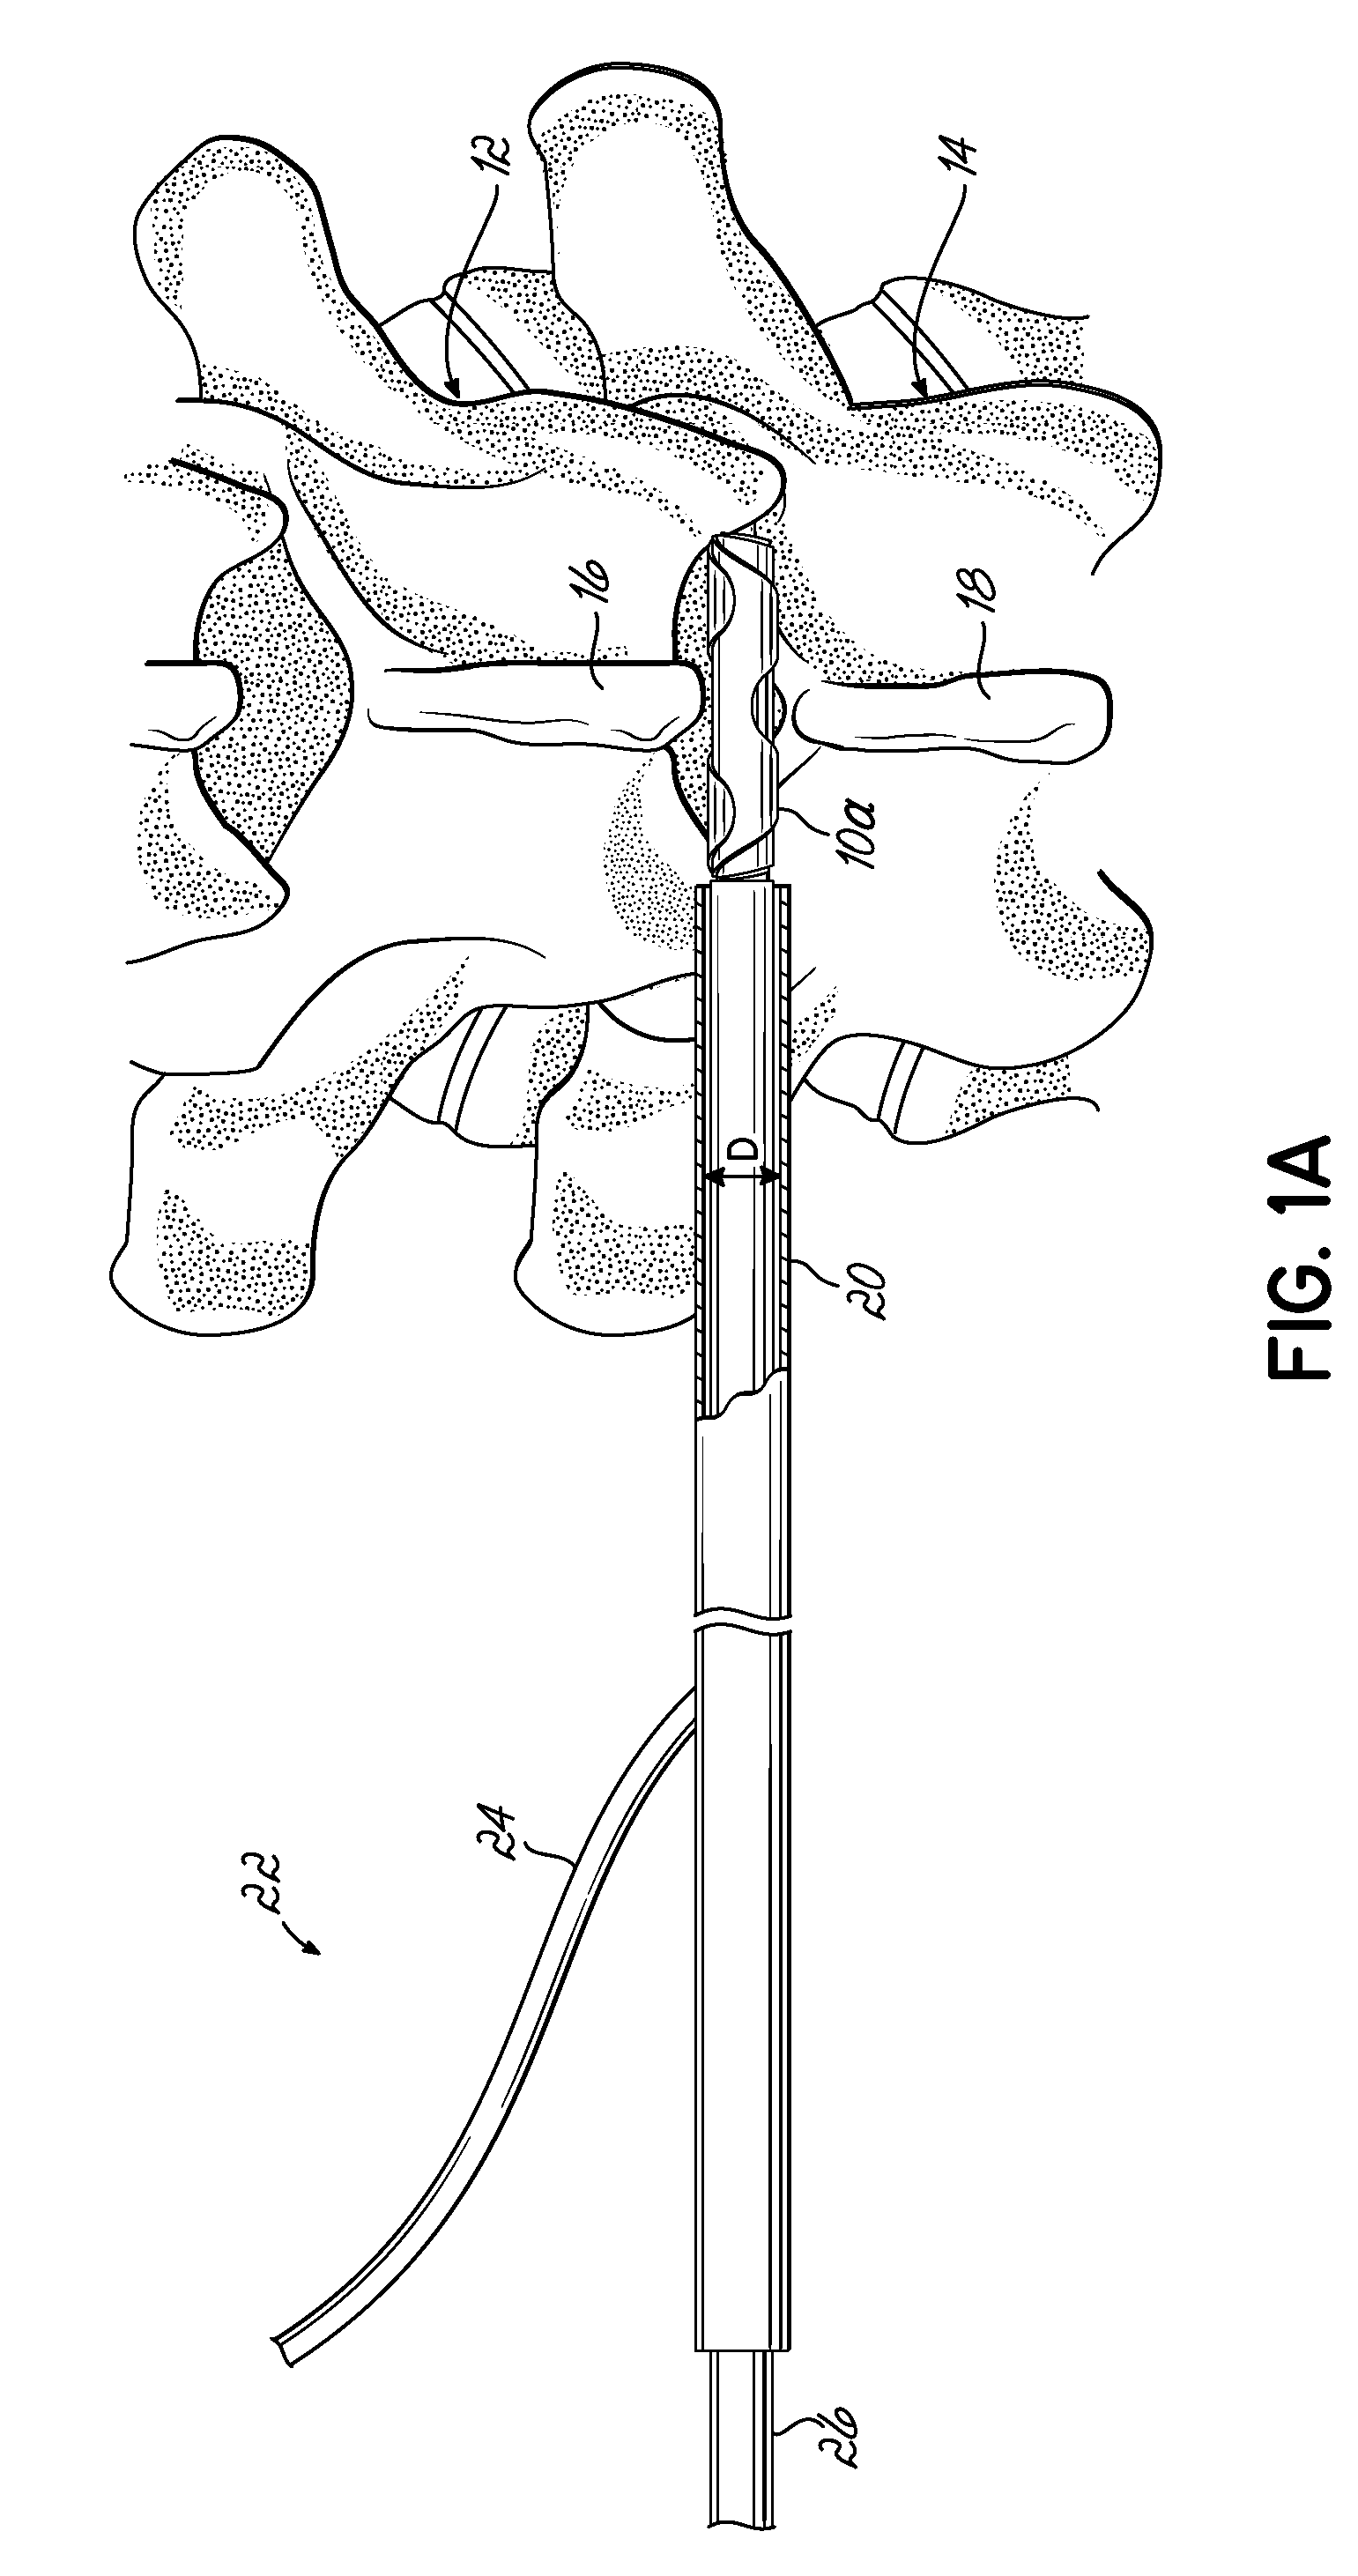 In-situ curable interspinous process spacer